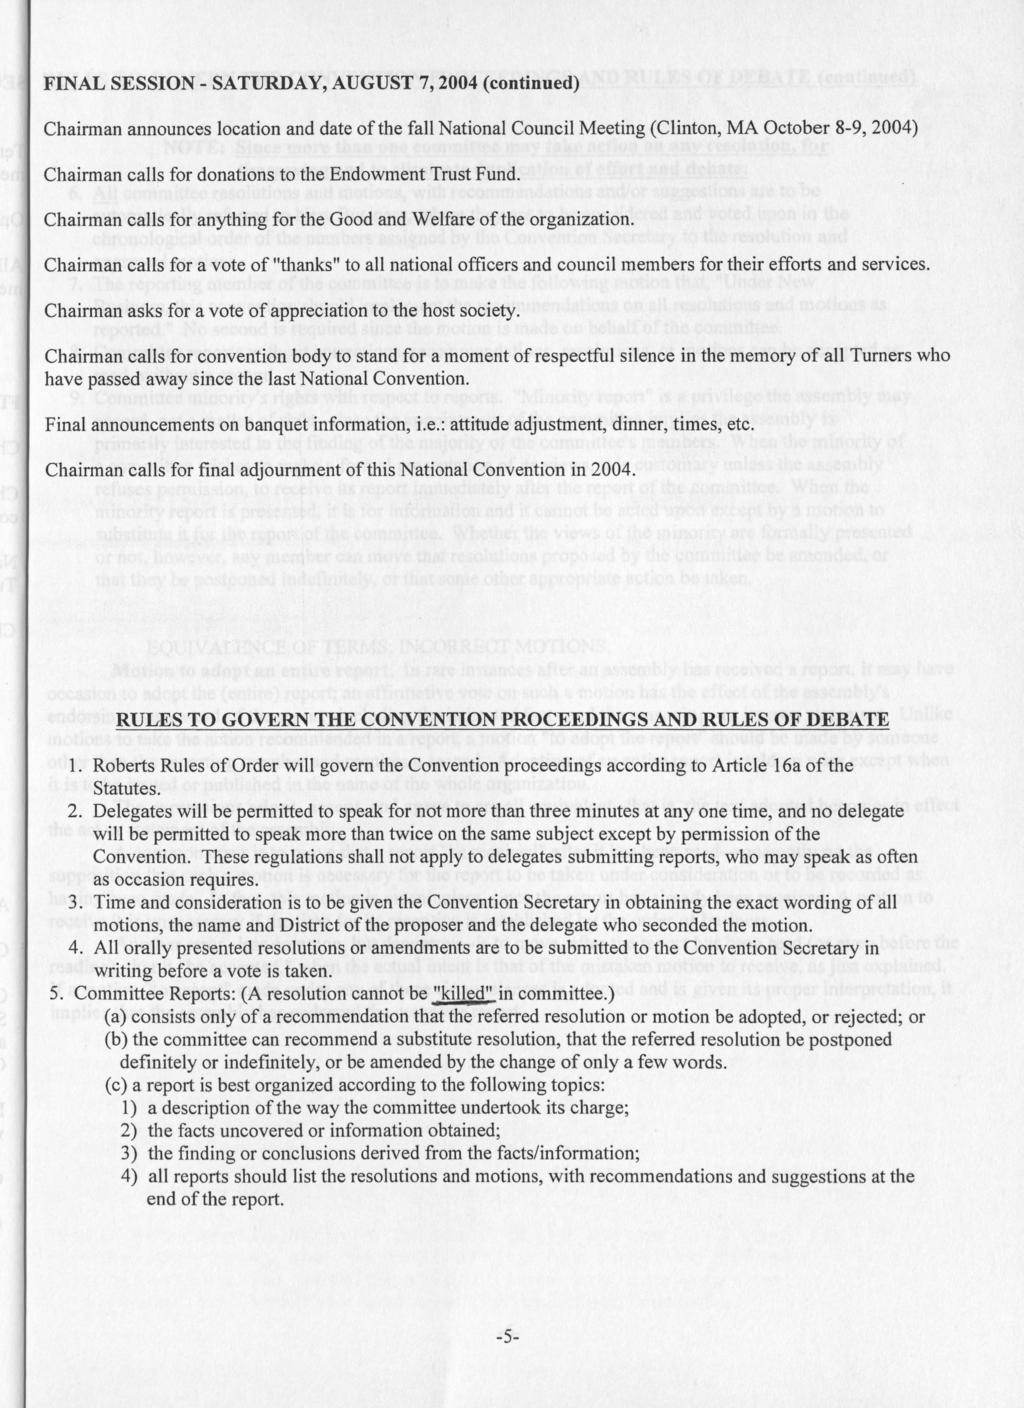 FINAL SESSION - SATURDAY, AUGUST 7, 2004 (continued) Chairman announces location and date of the fall National Council Meeting (Clinton, MA October 8-9, 2004) Chairman calls for donations to the